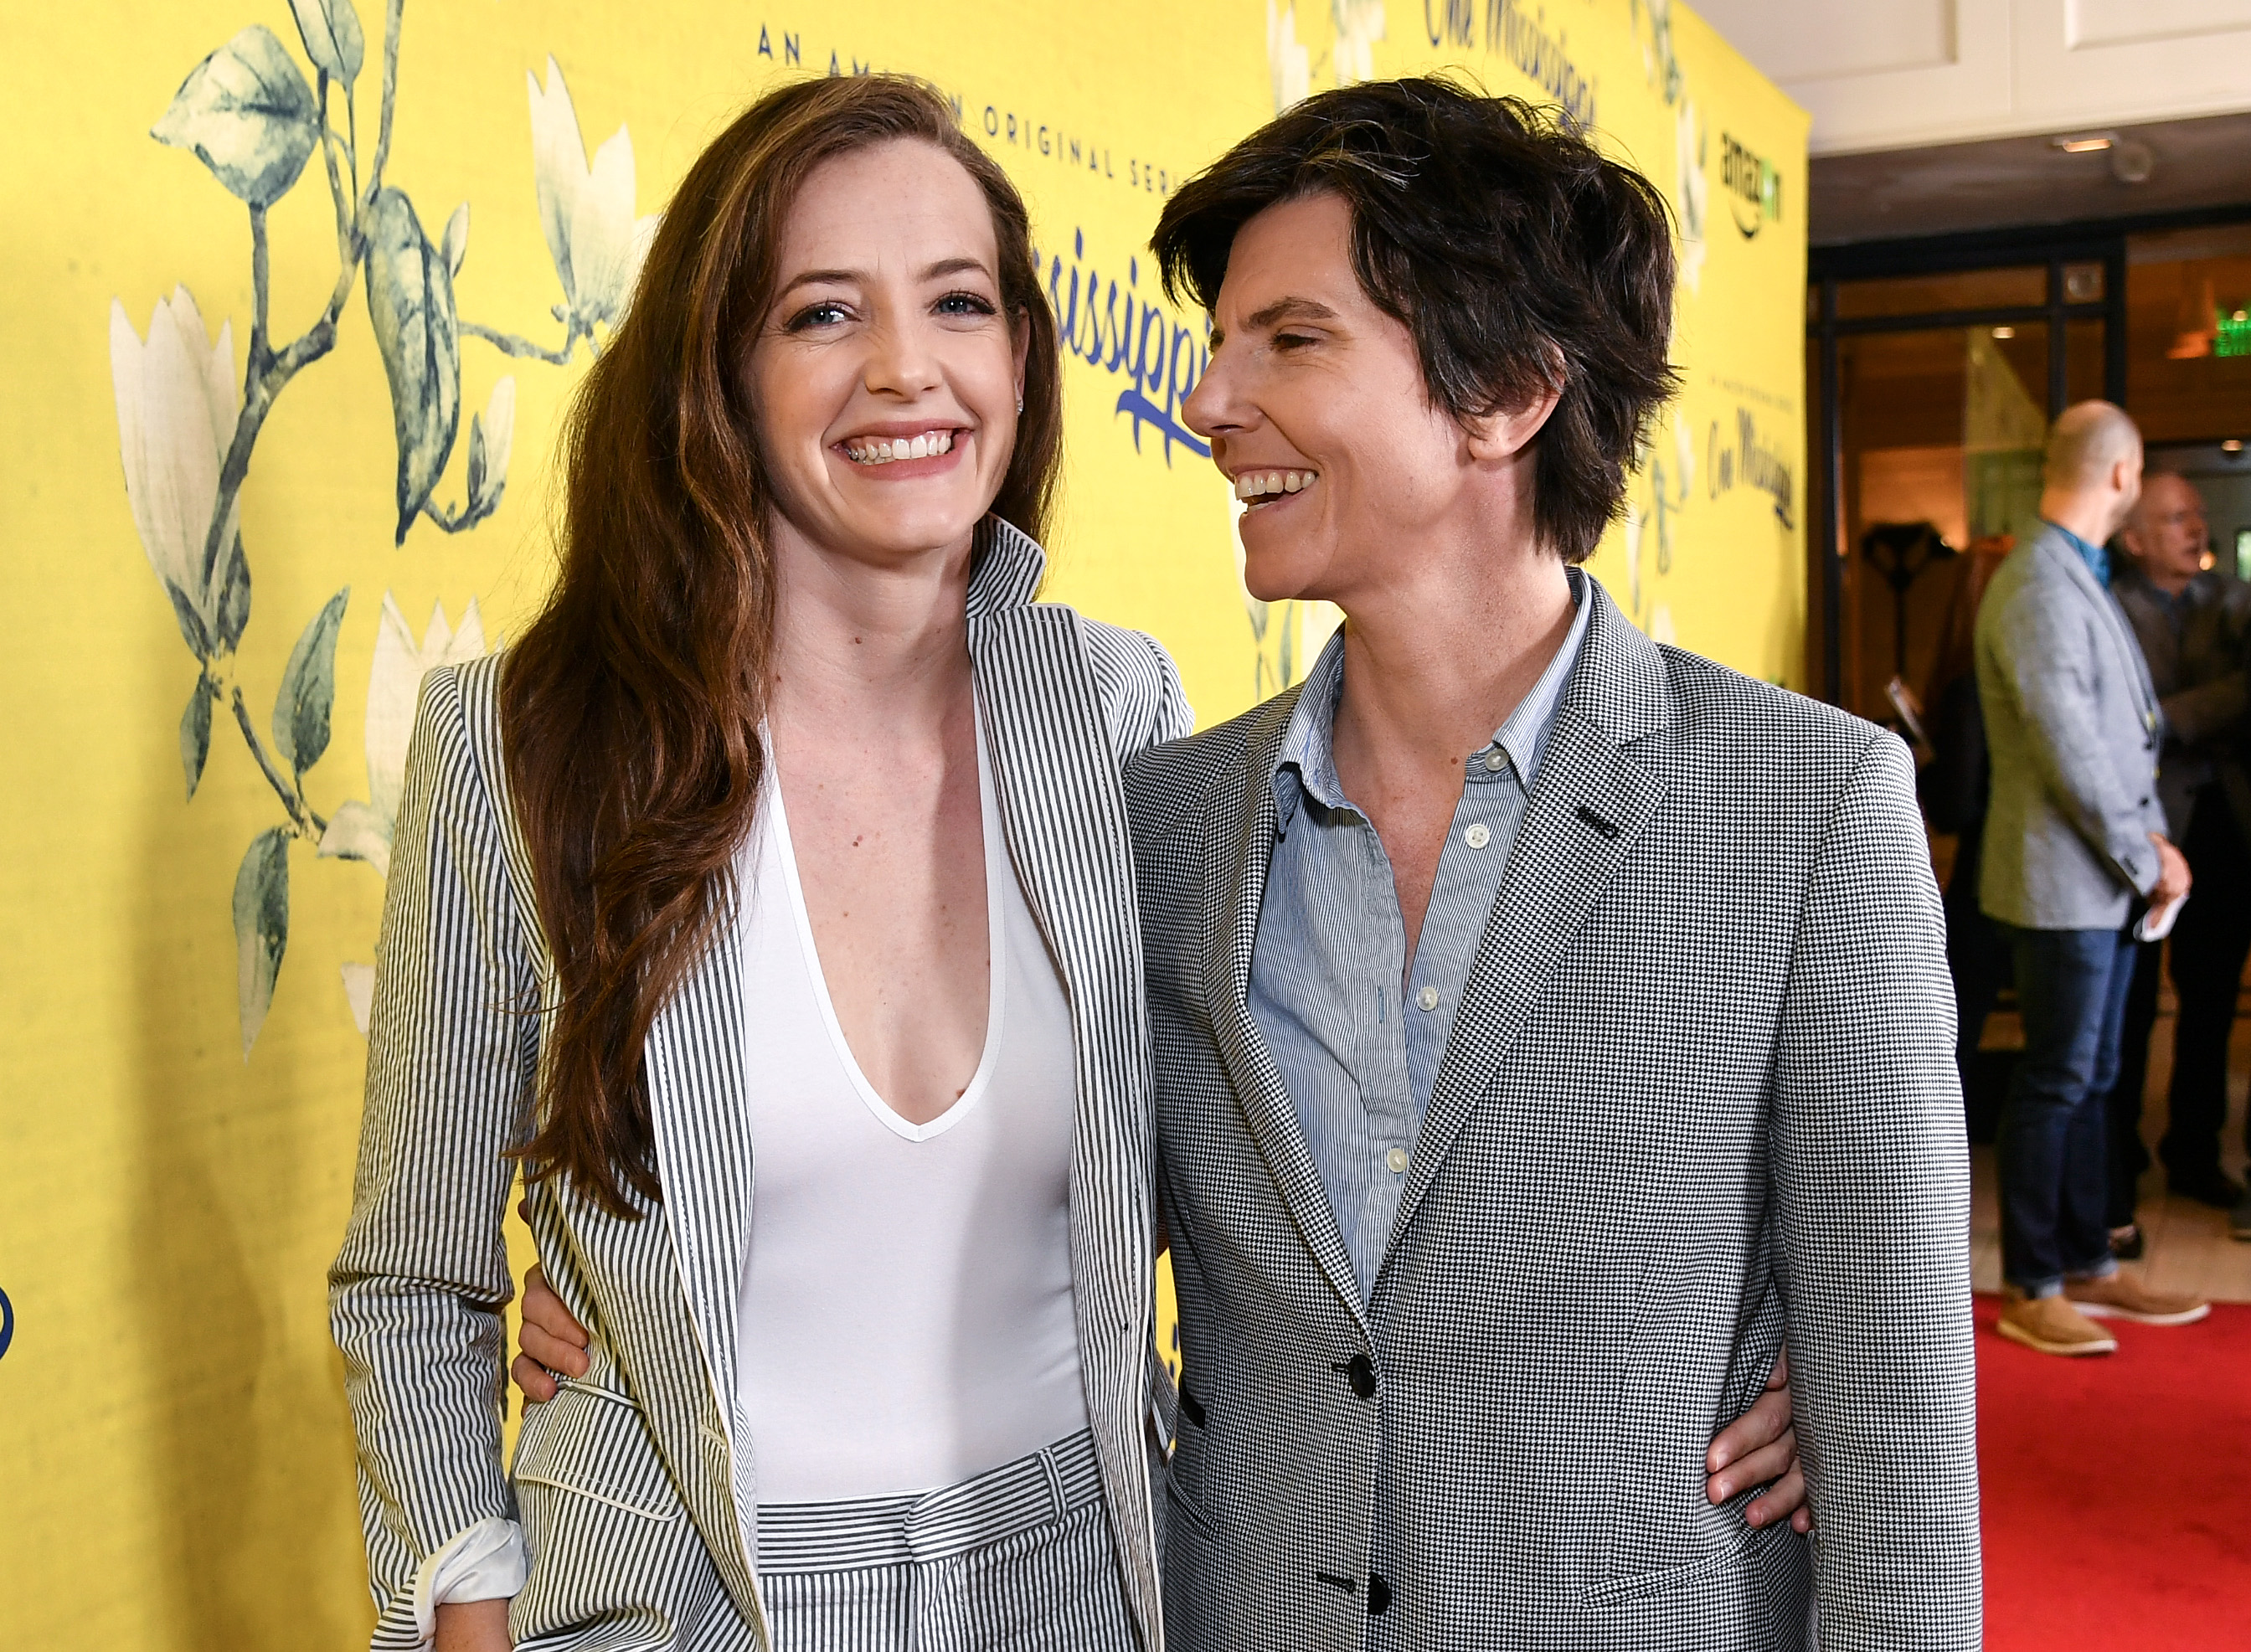 Allynne and Notaro at the premiere of One Mississippi in 2016